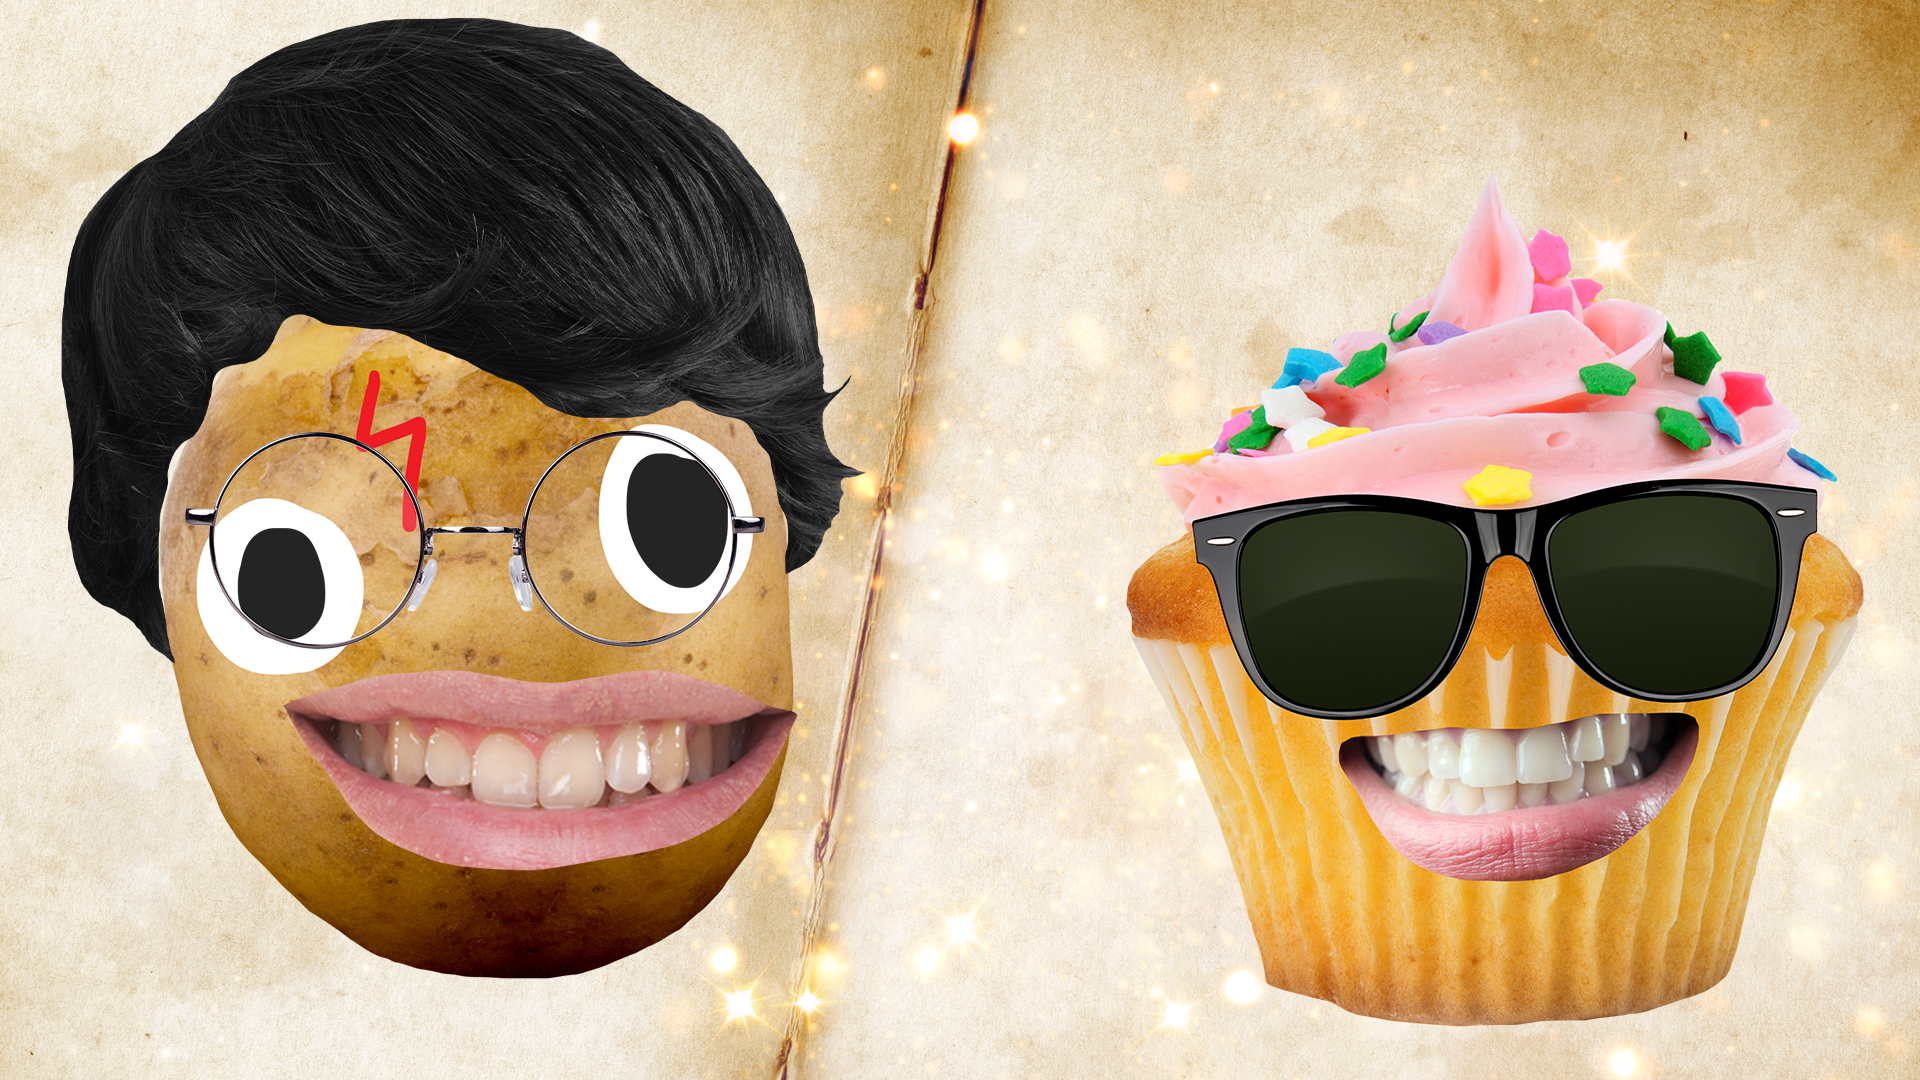 Harry and grinning cupcake on book background